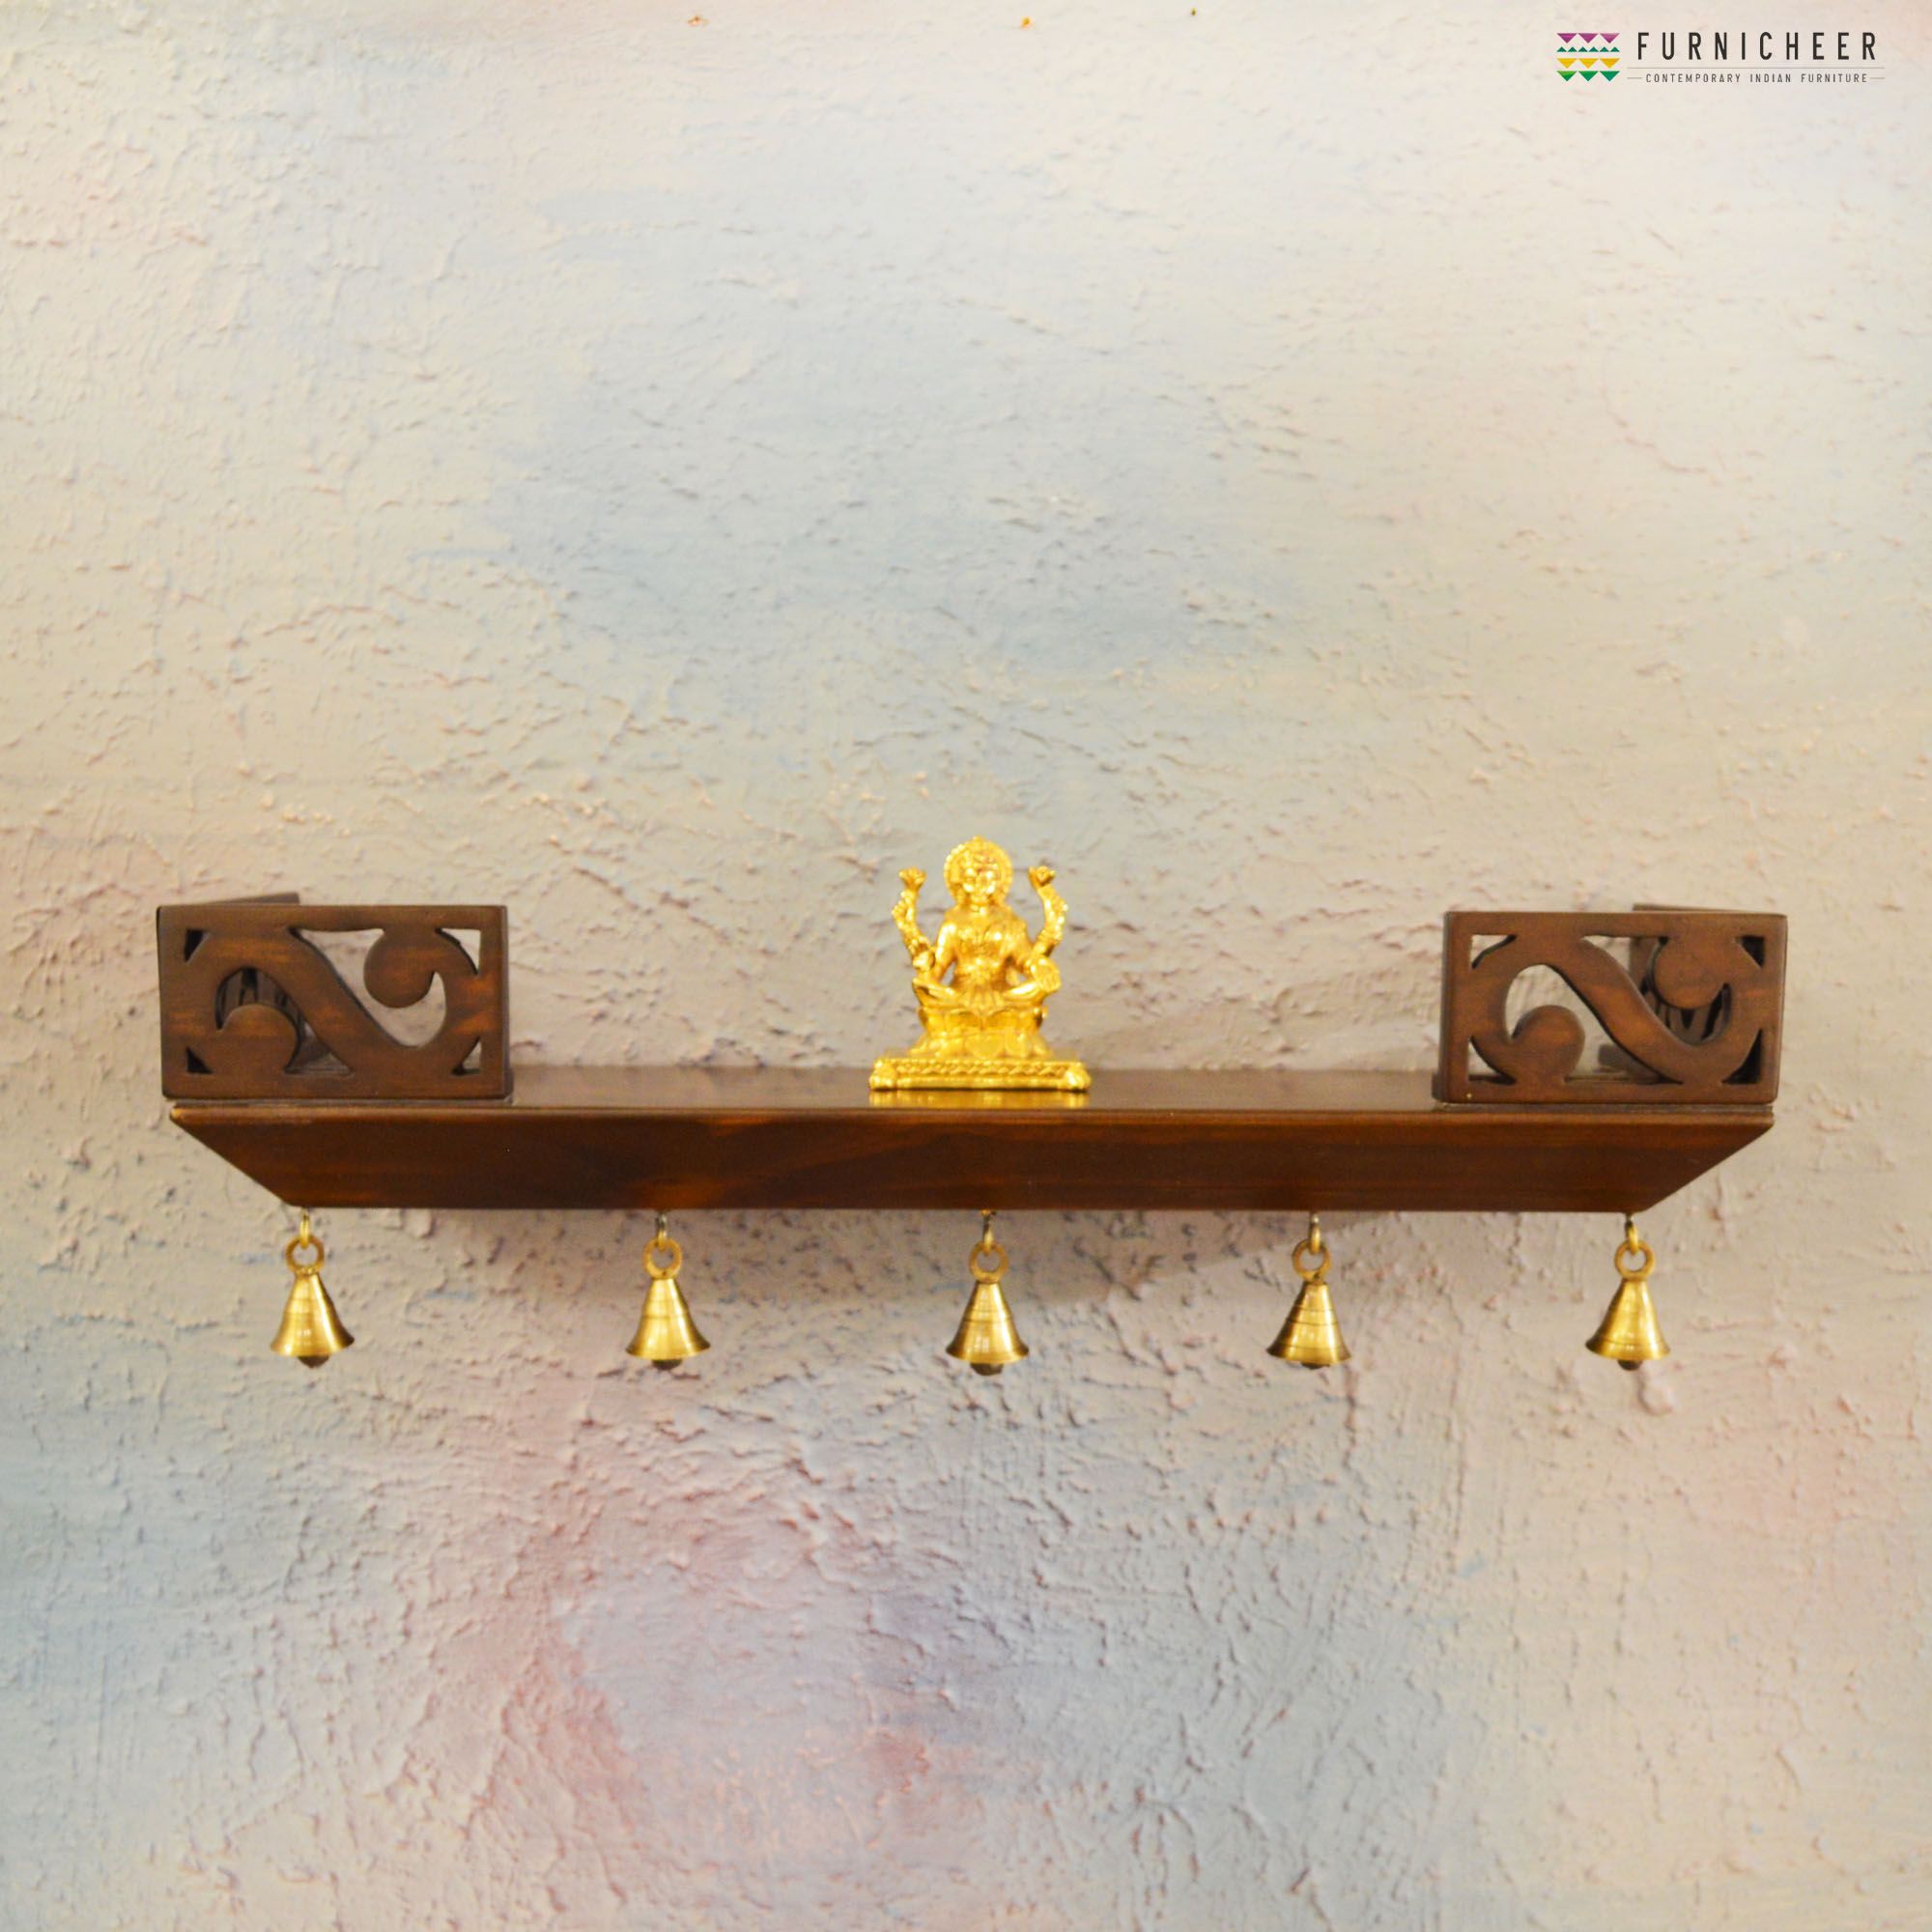 Pooja Shelf Designs: Blending Tradition with Modernity